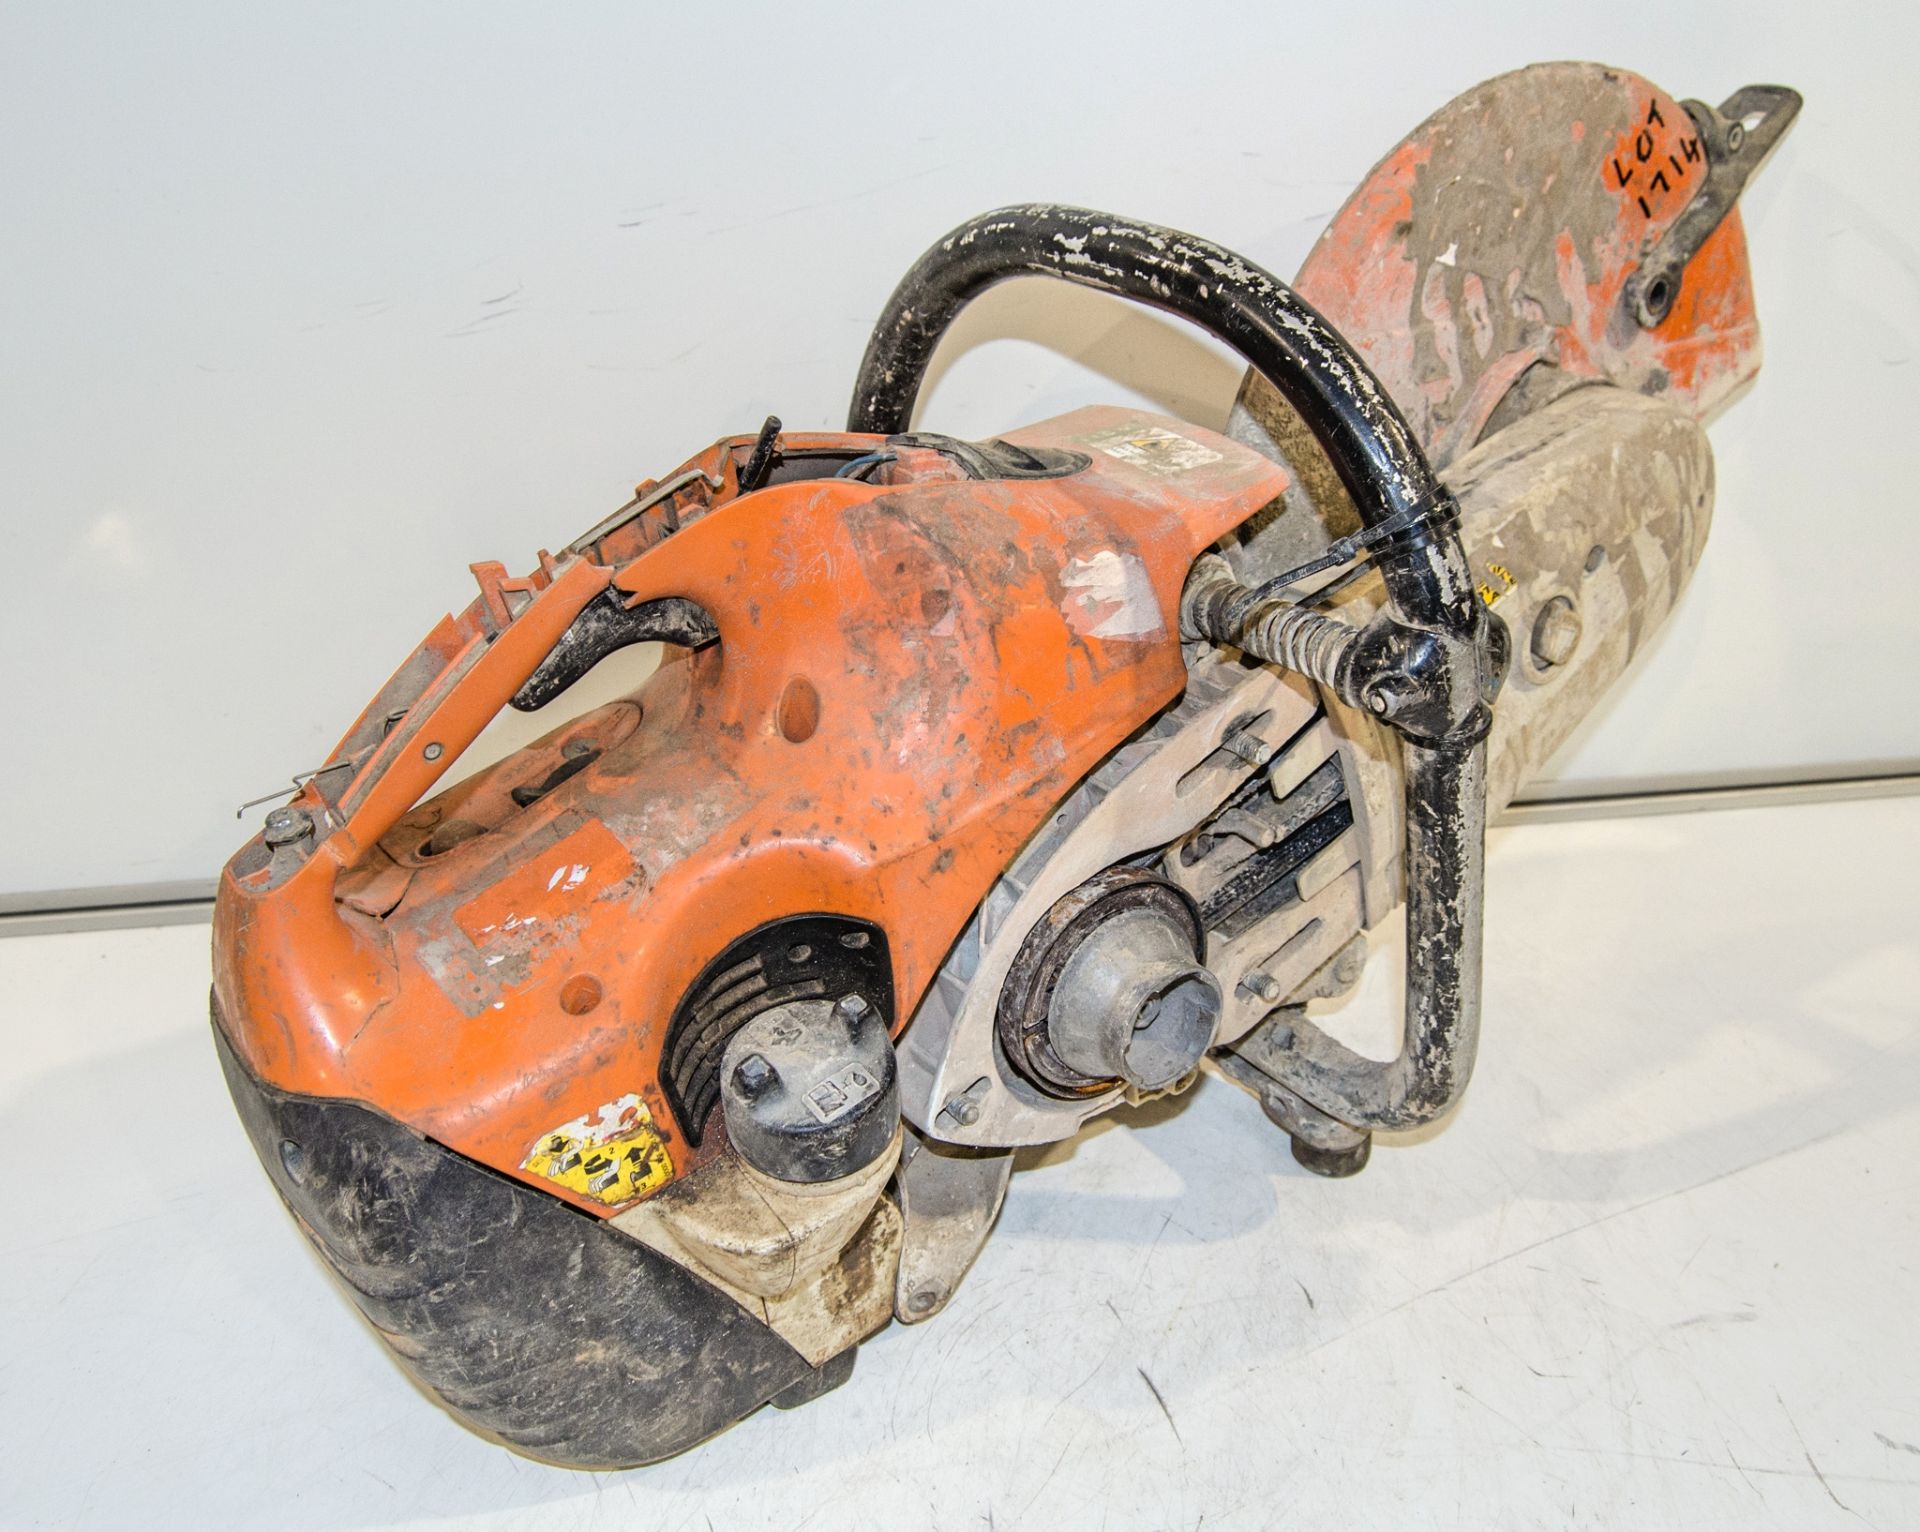 Stihl TS410 petrol driven cut off saw ** Pull cord assembly missing ** - Image 2 of 2